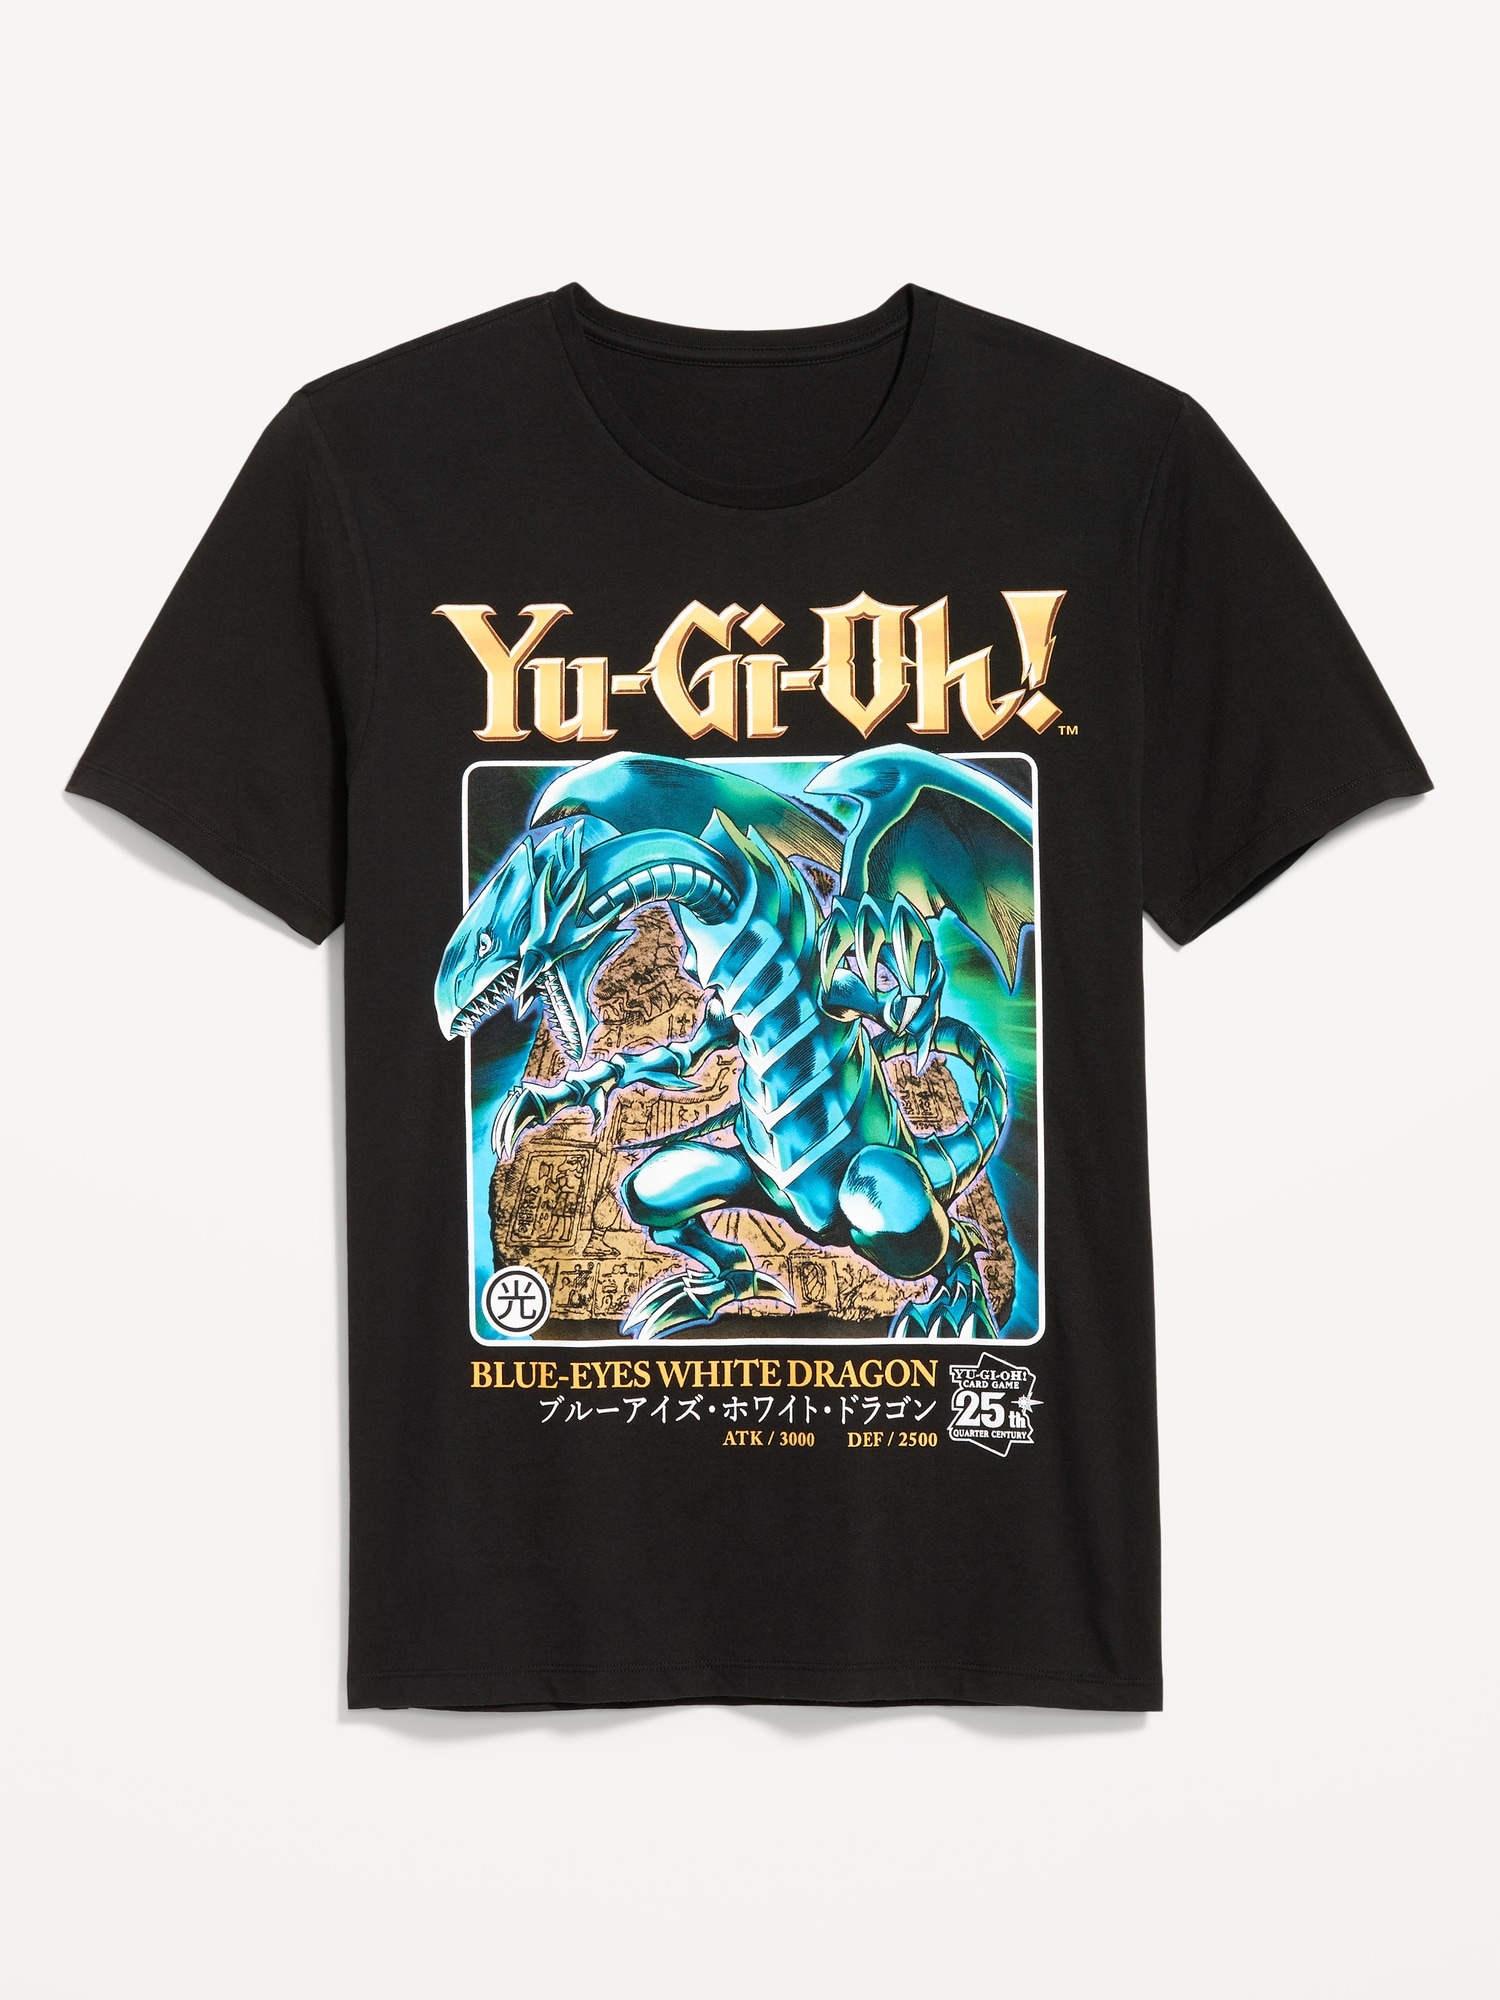 Yu-Gi-Oh! Gender-Neutral T-Shirt for Adults